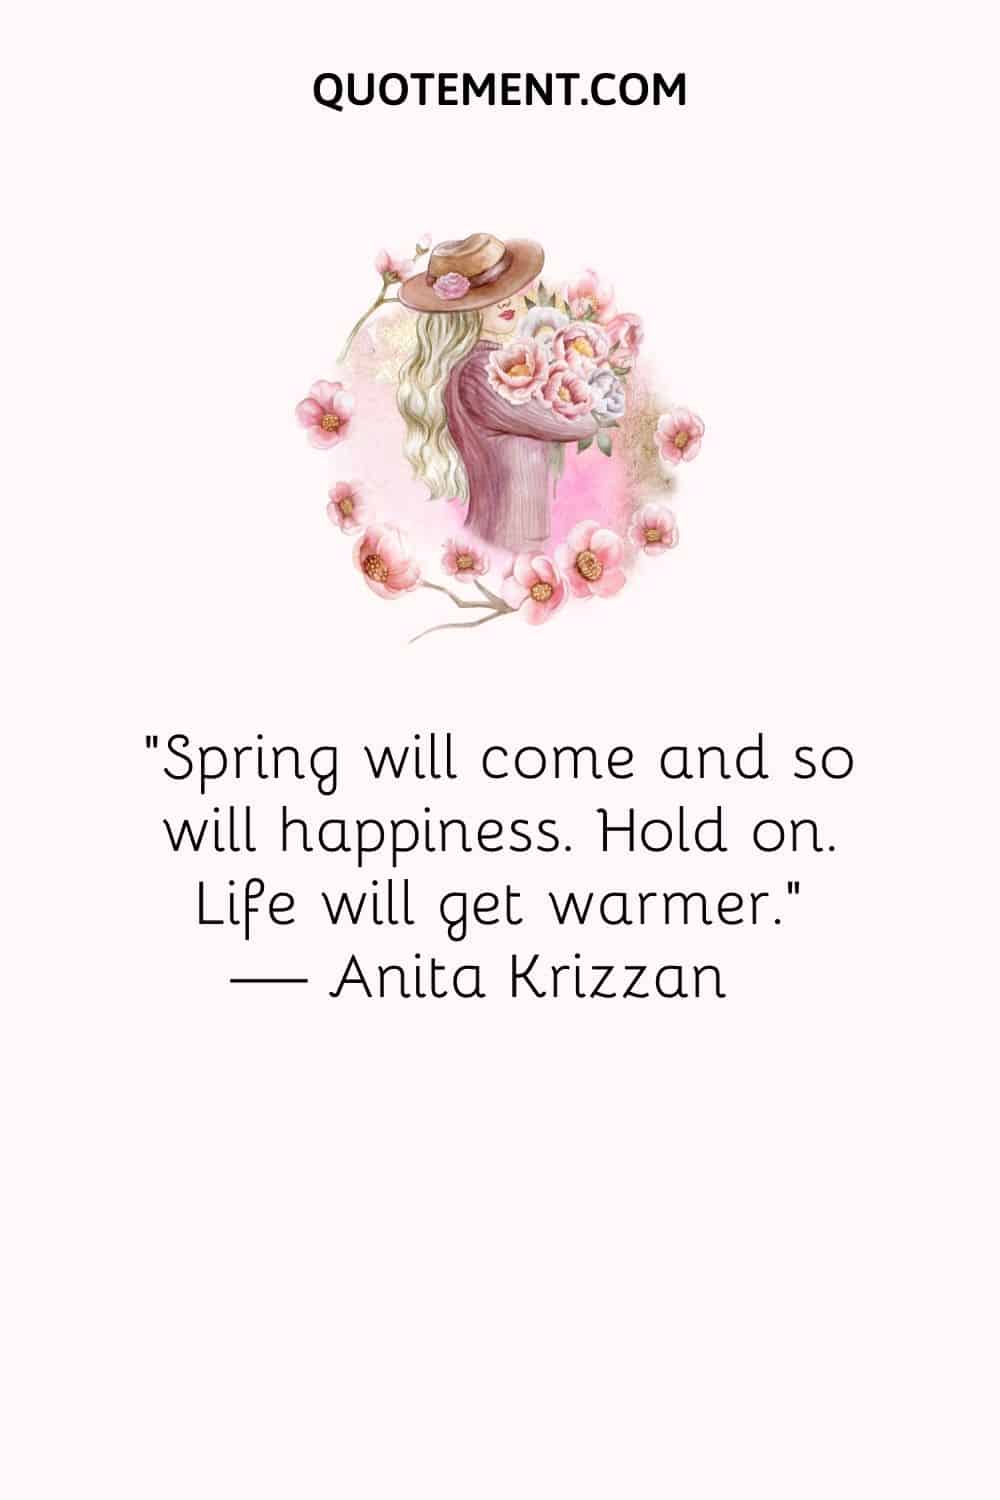 Spring will come and so will happiness